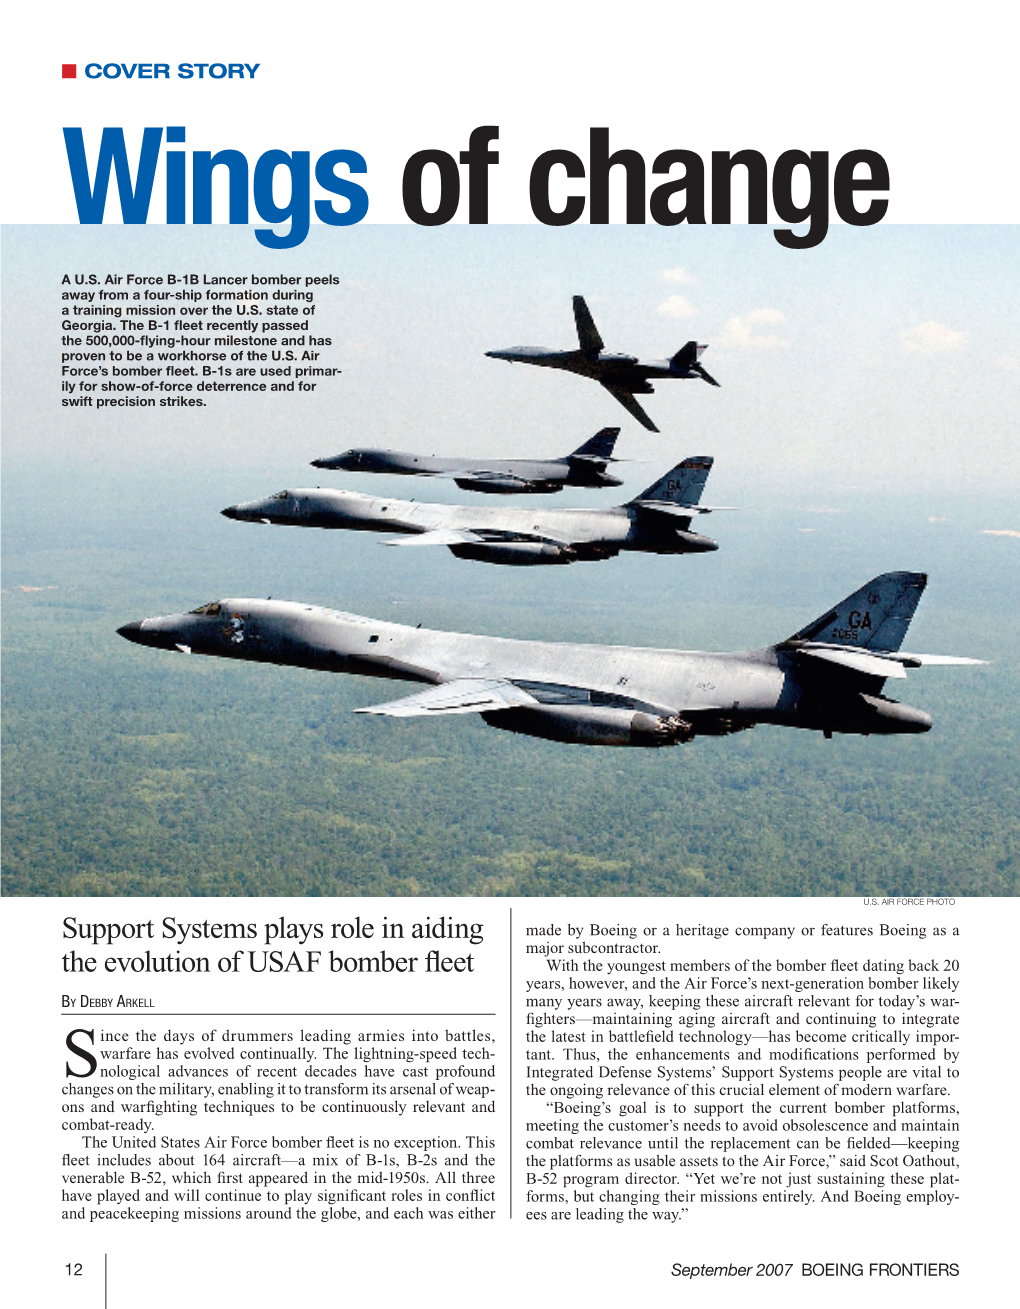 Support Systems Plays Role in Aiding the Evolution of USAF Bomber Fleet